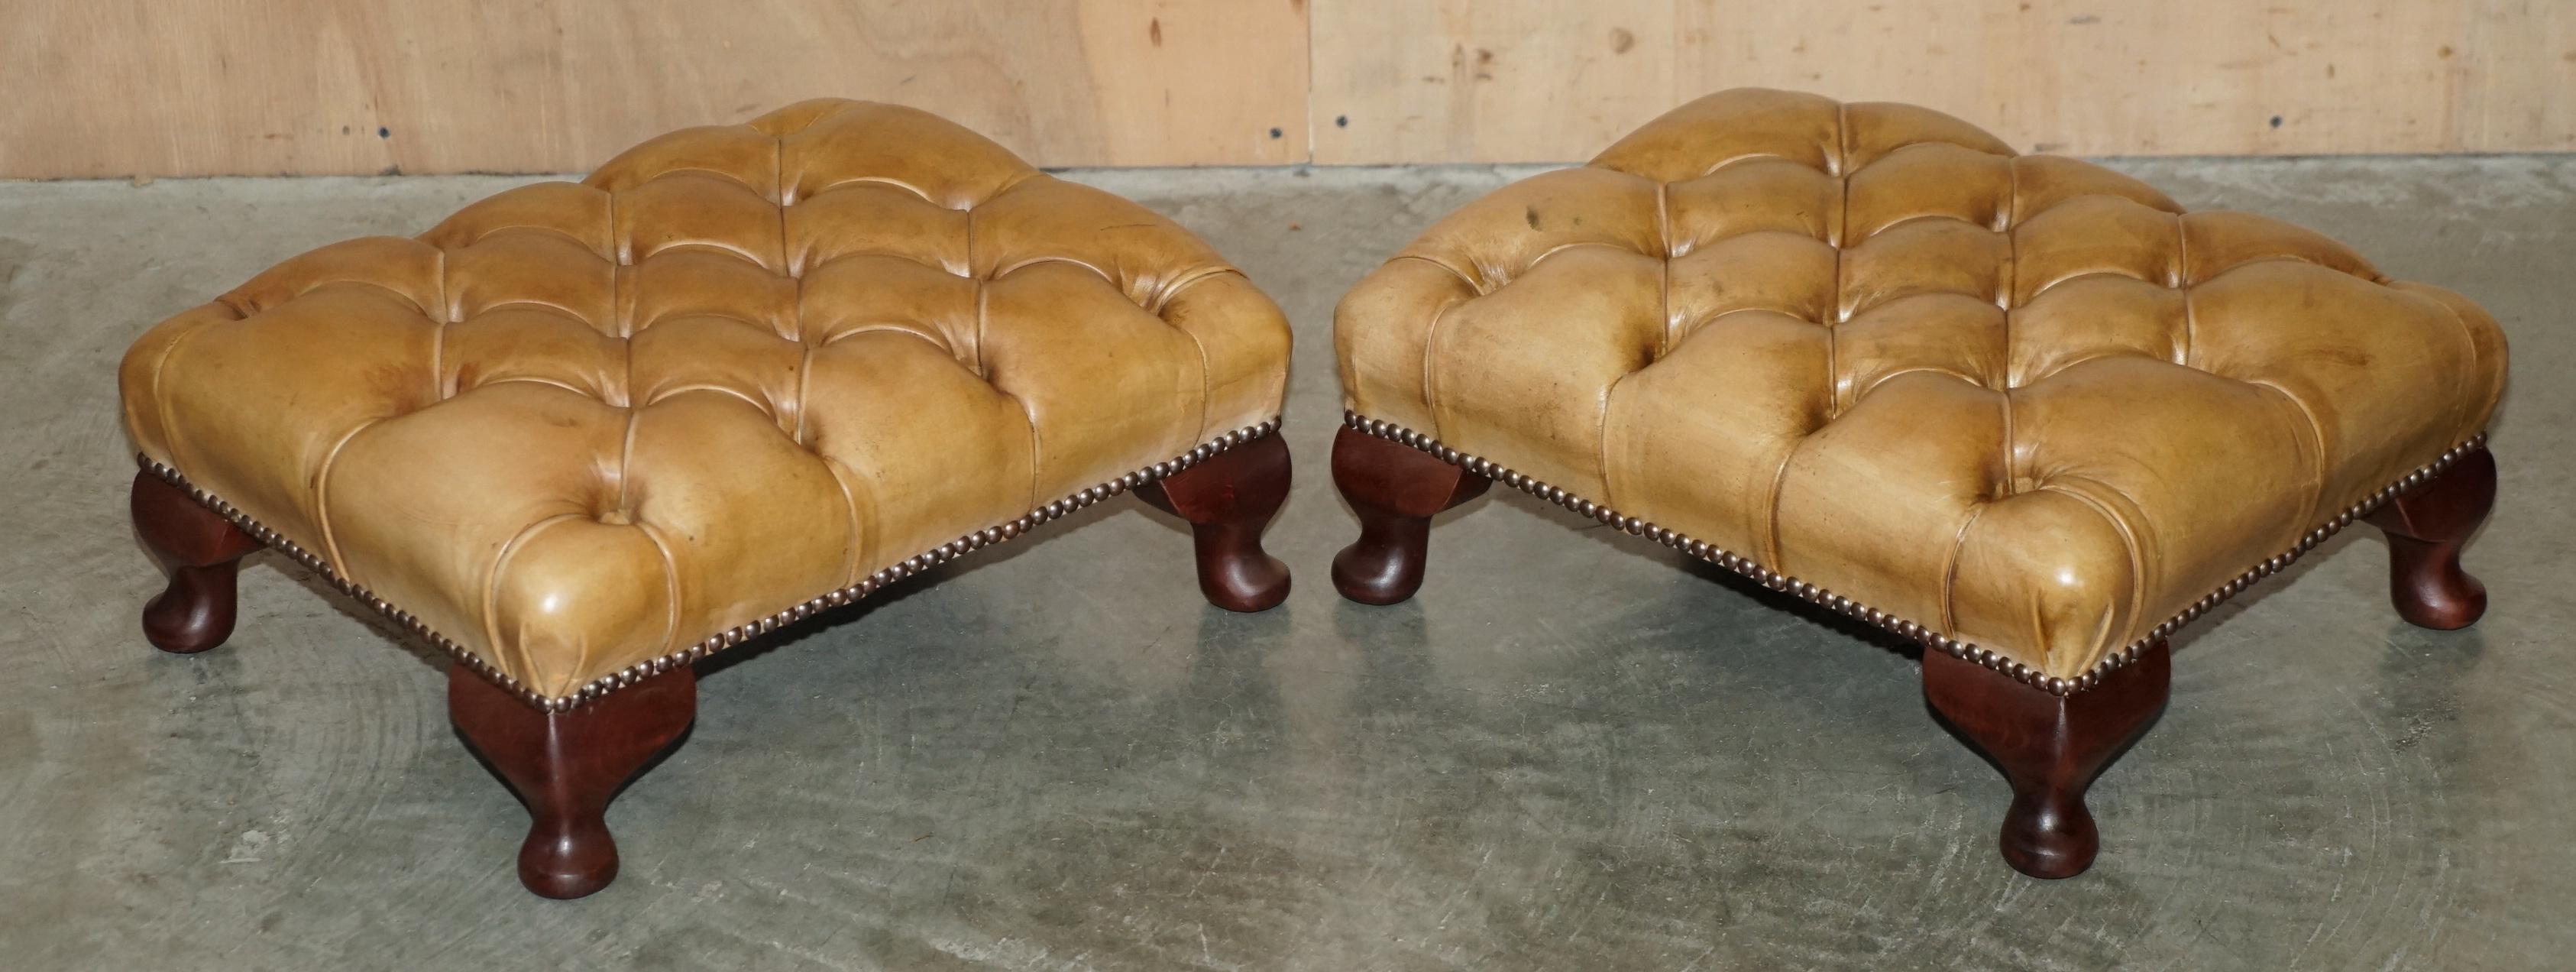 PAIR OF VINTAGE TAN BROWN LEATHER CHESTERFiELD WINGBACK CHAIRS WITH FOOTSTOOLS For Sale 9